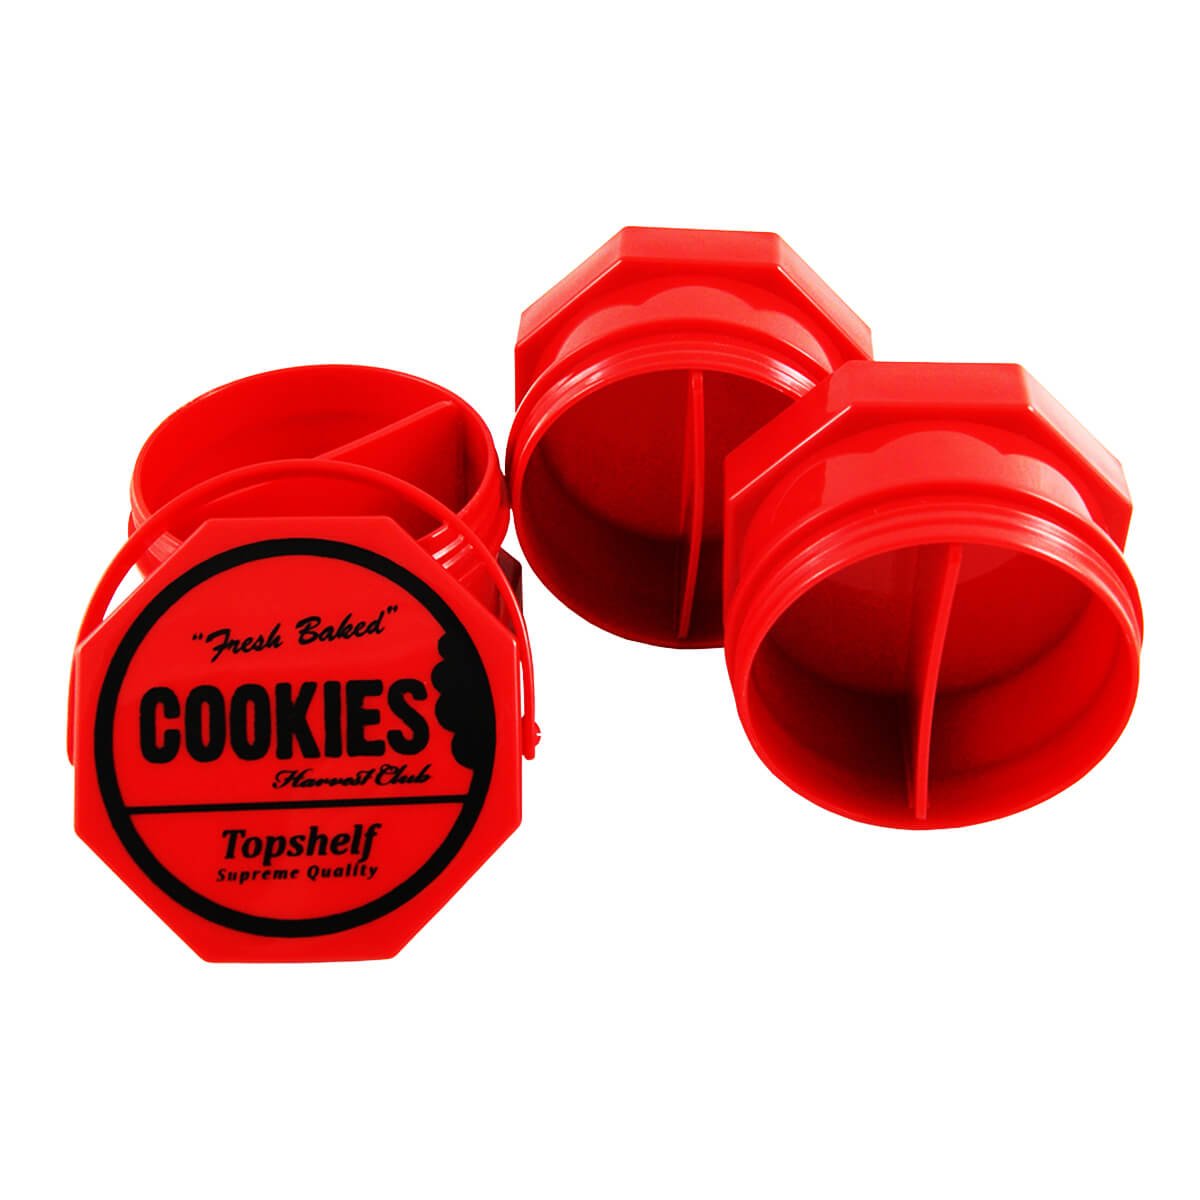 https://d30qj4y22qnbc7.cloudfront.net/wp-content/uploads/2020/10/wholesale-cookies-red-stacked-plastic-containers-2.jpg